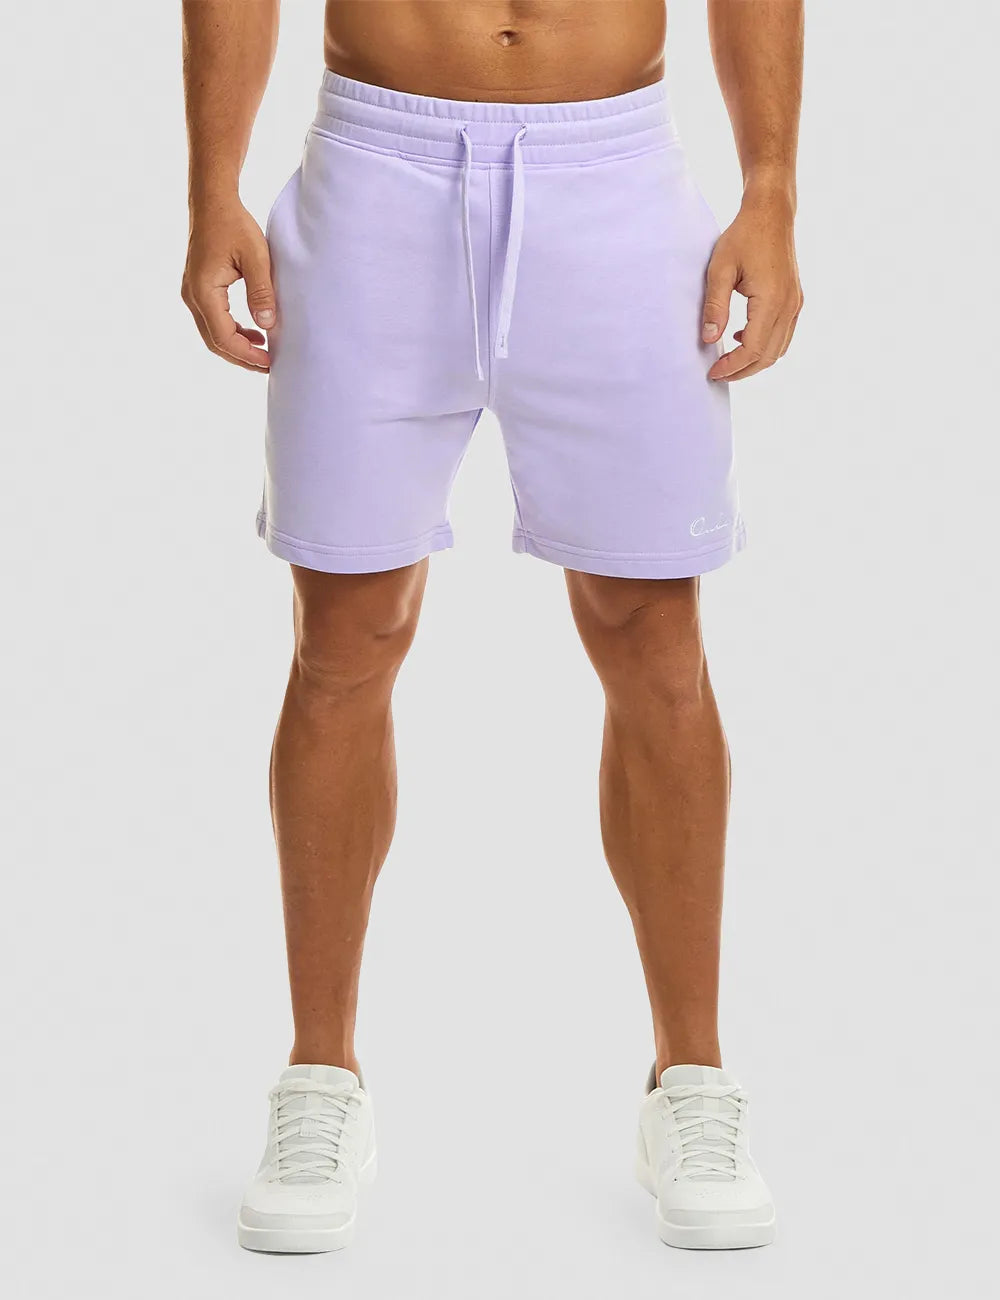 Cotton Steady State Short 6"